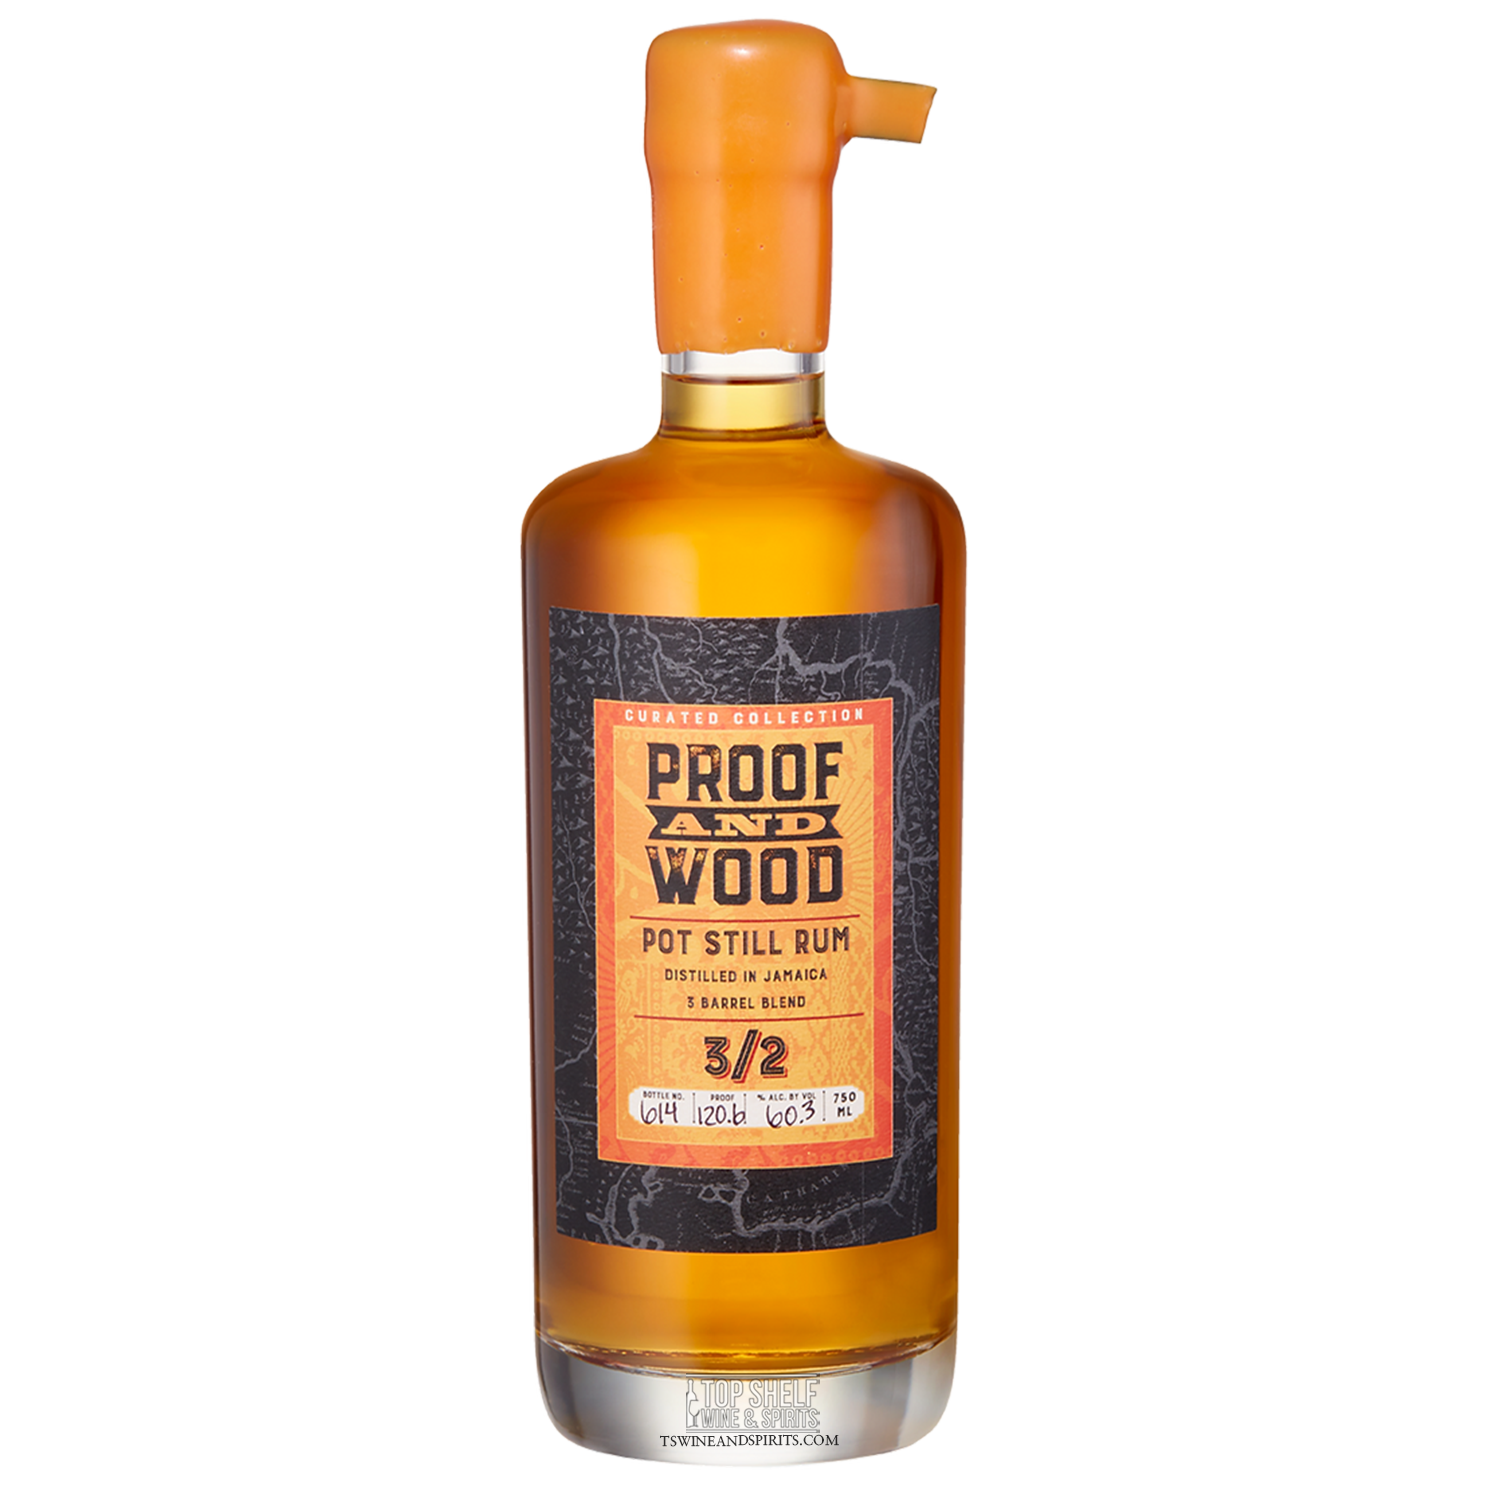 Proof and Wood 3/2 Pot Still Rum